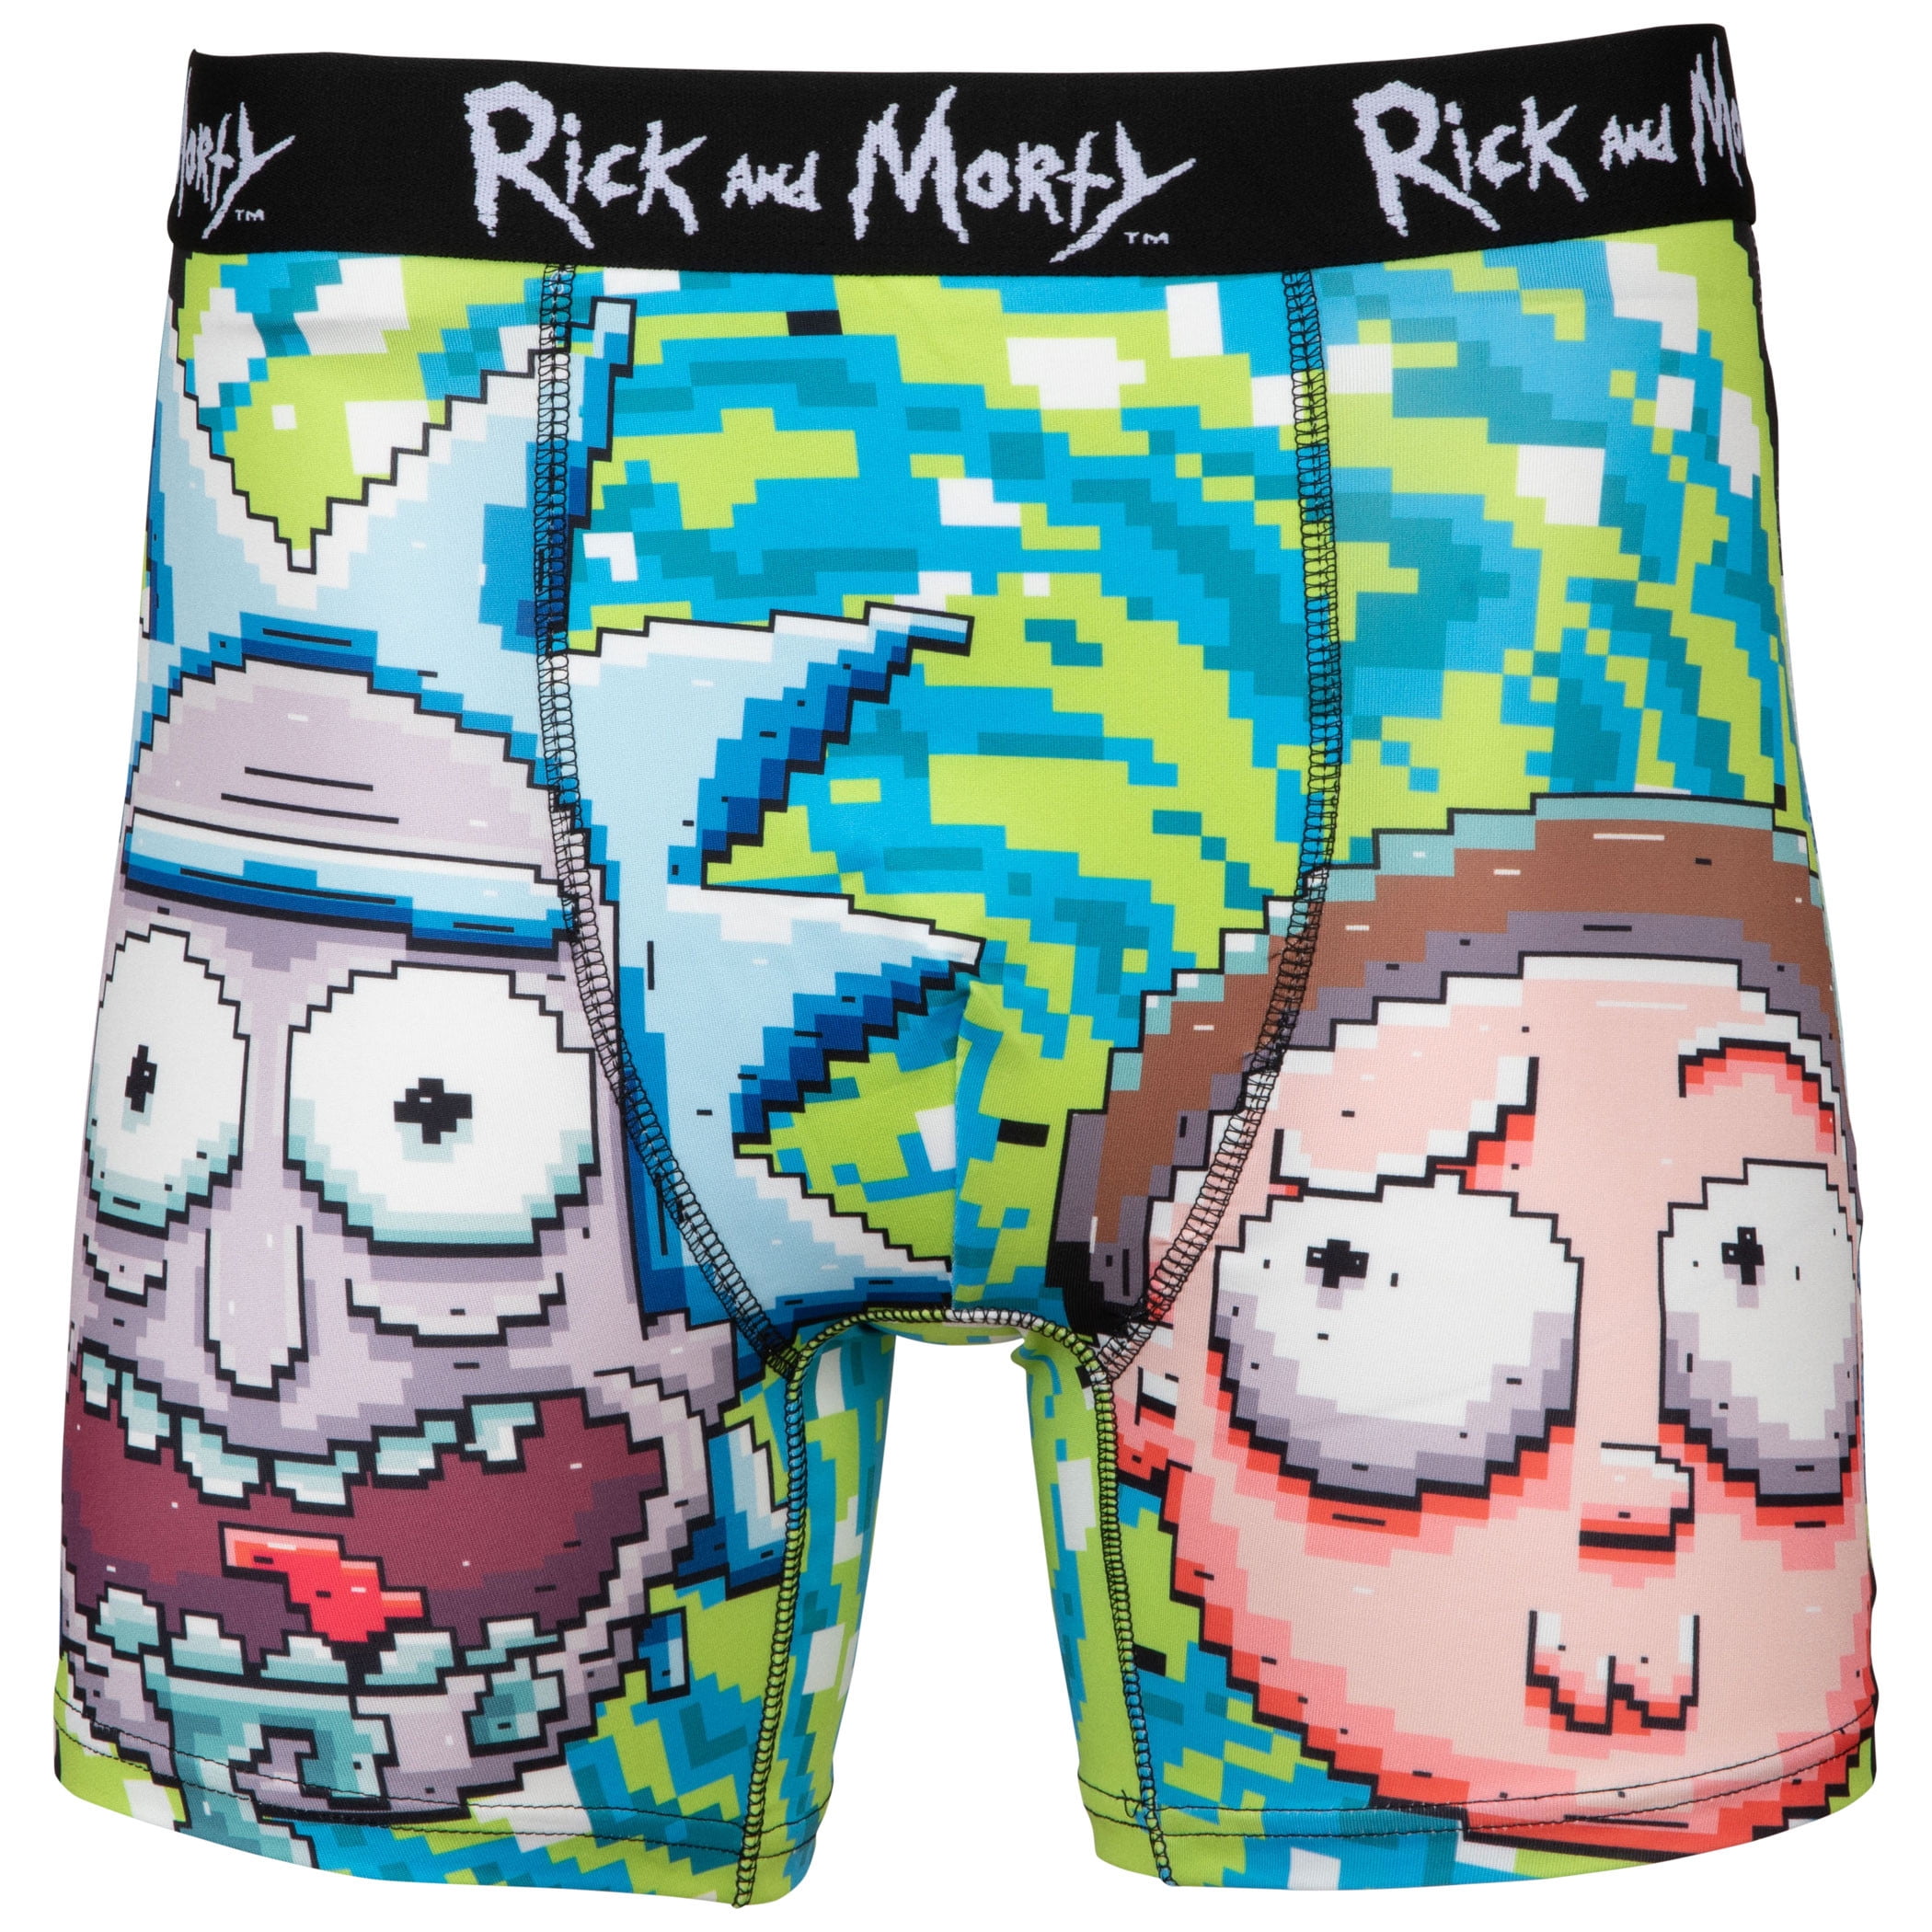 Rick and Morty with Portal Pixelated Boxer Briefs-XLarge (40-42) 